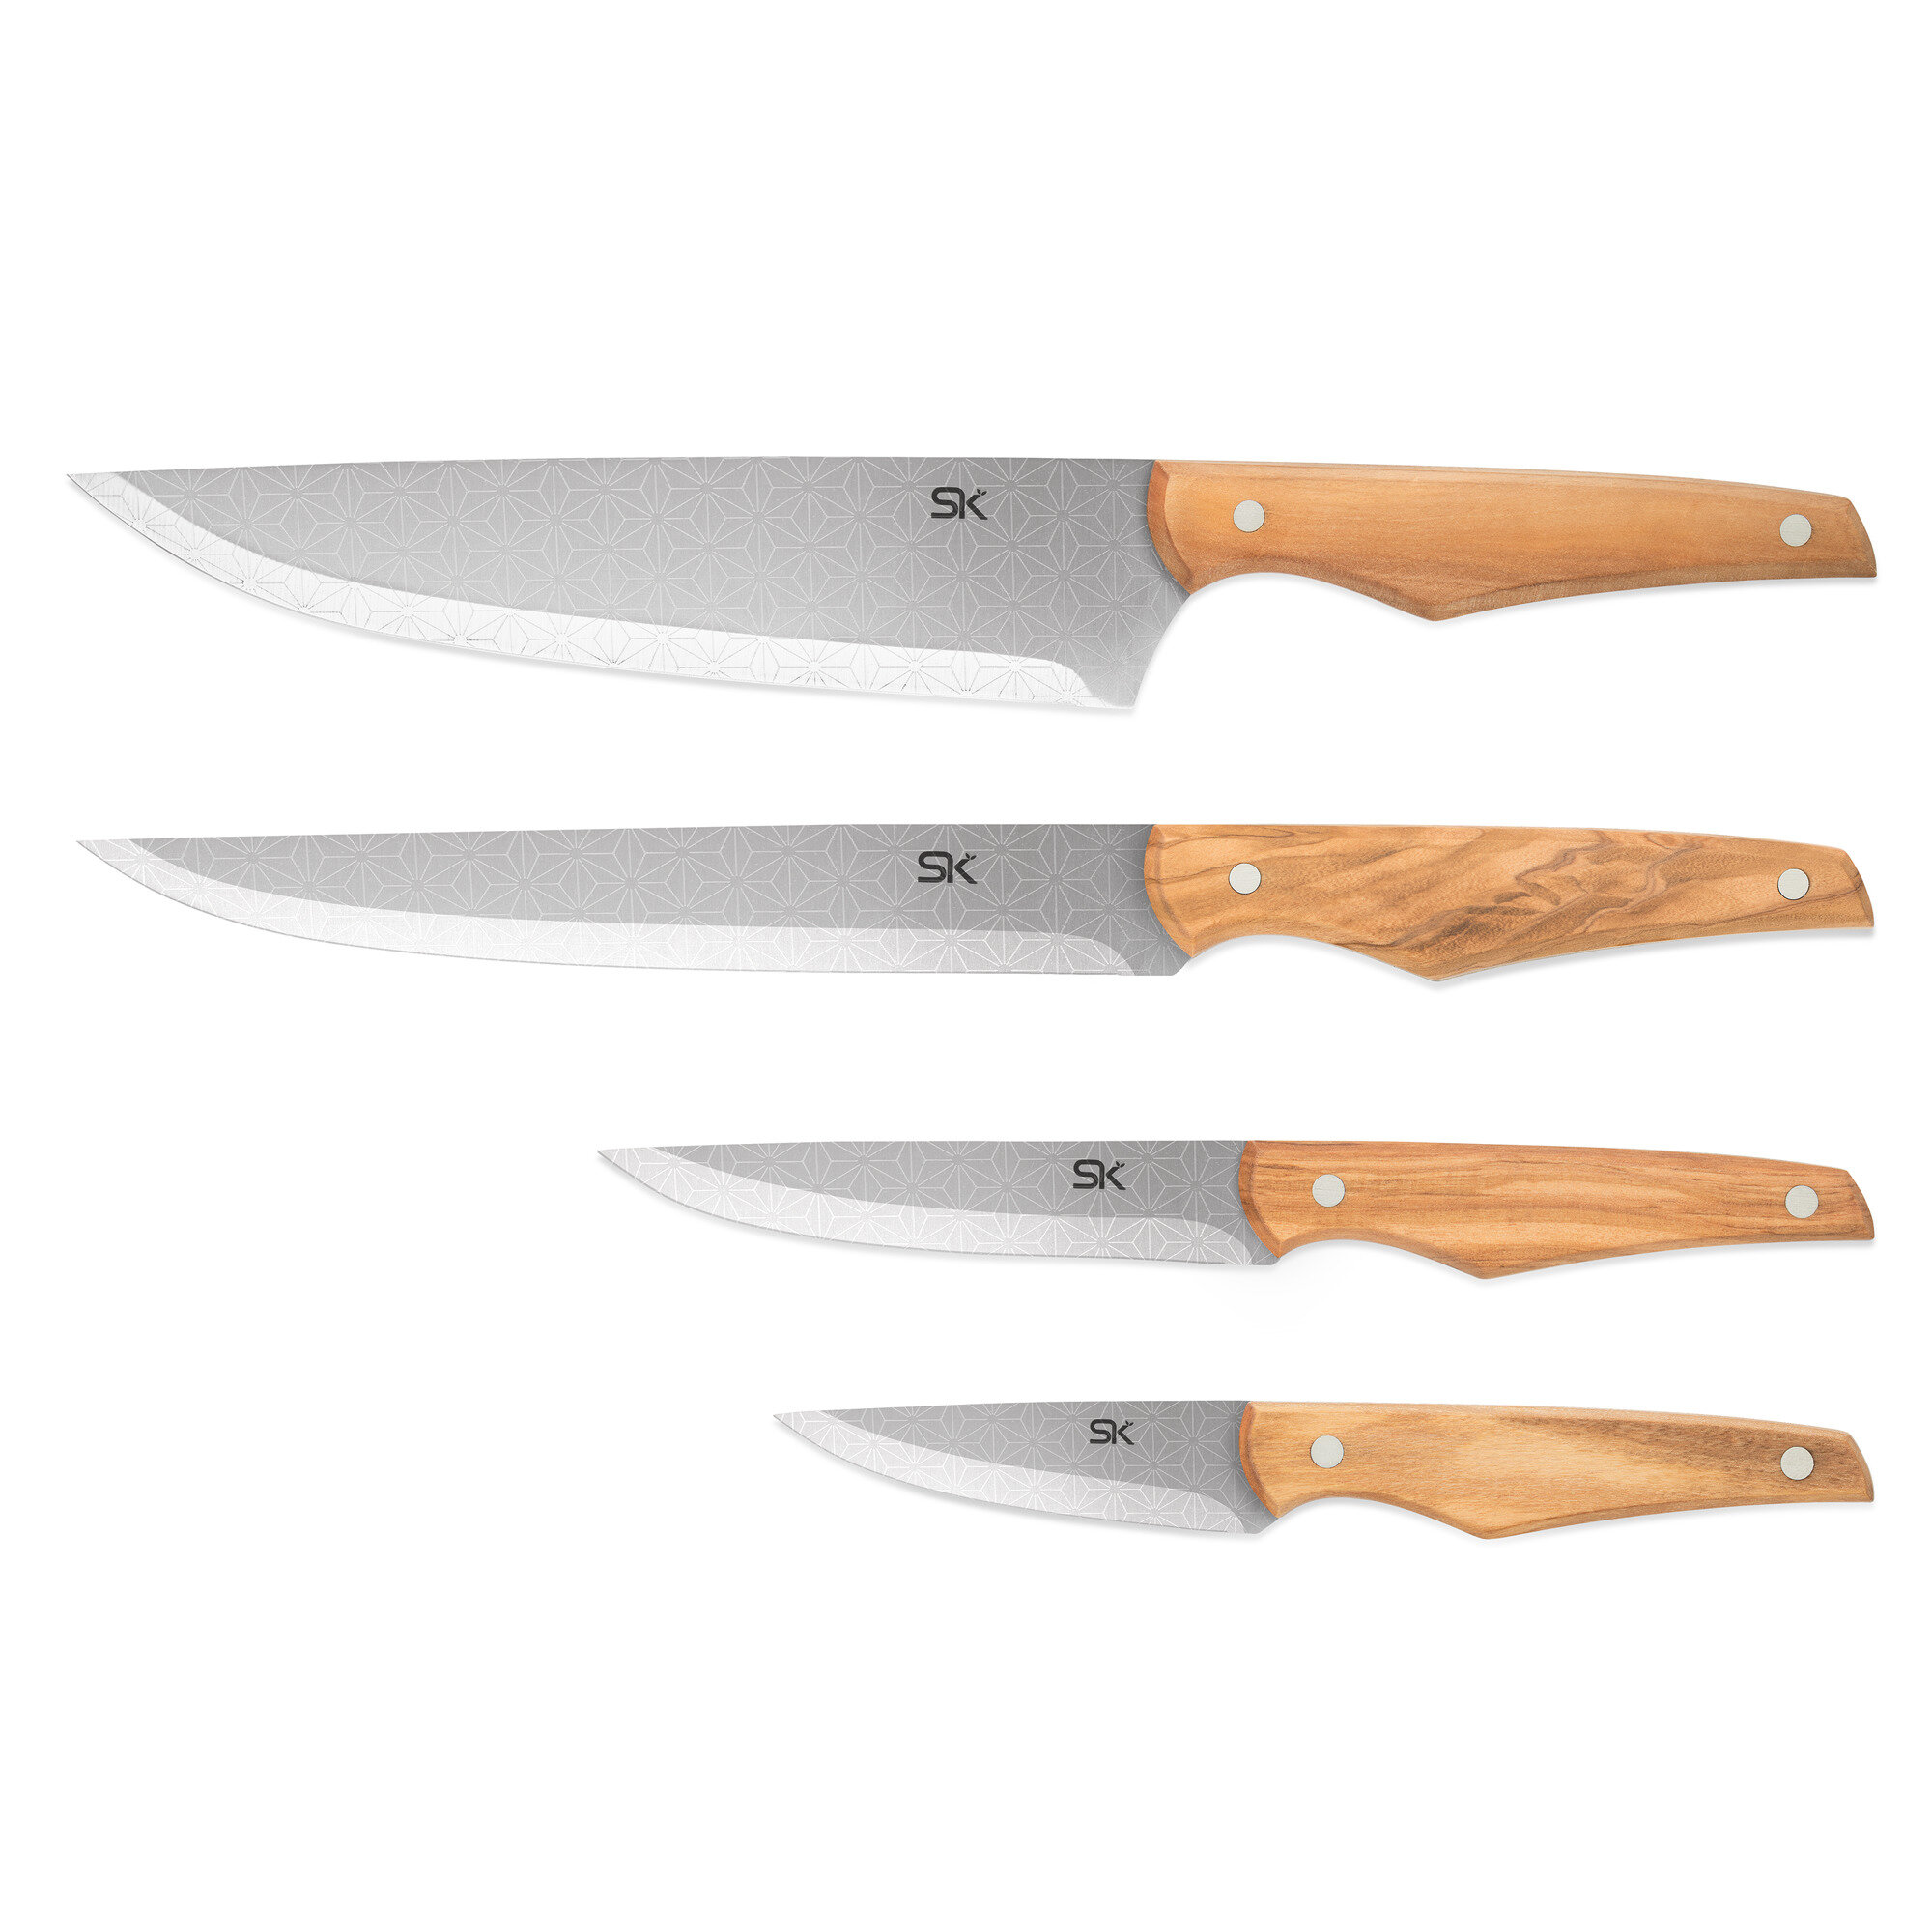 Knife Set with Blade Guards 5-piece Skandia by Hampton Forge